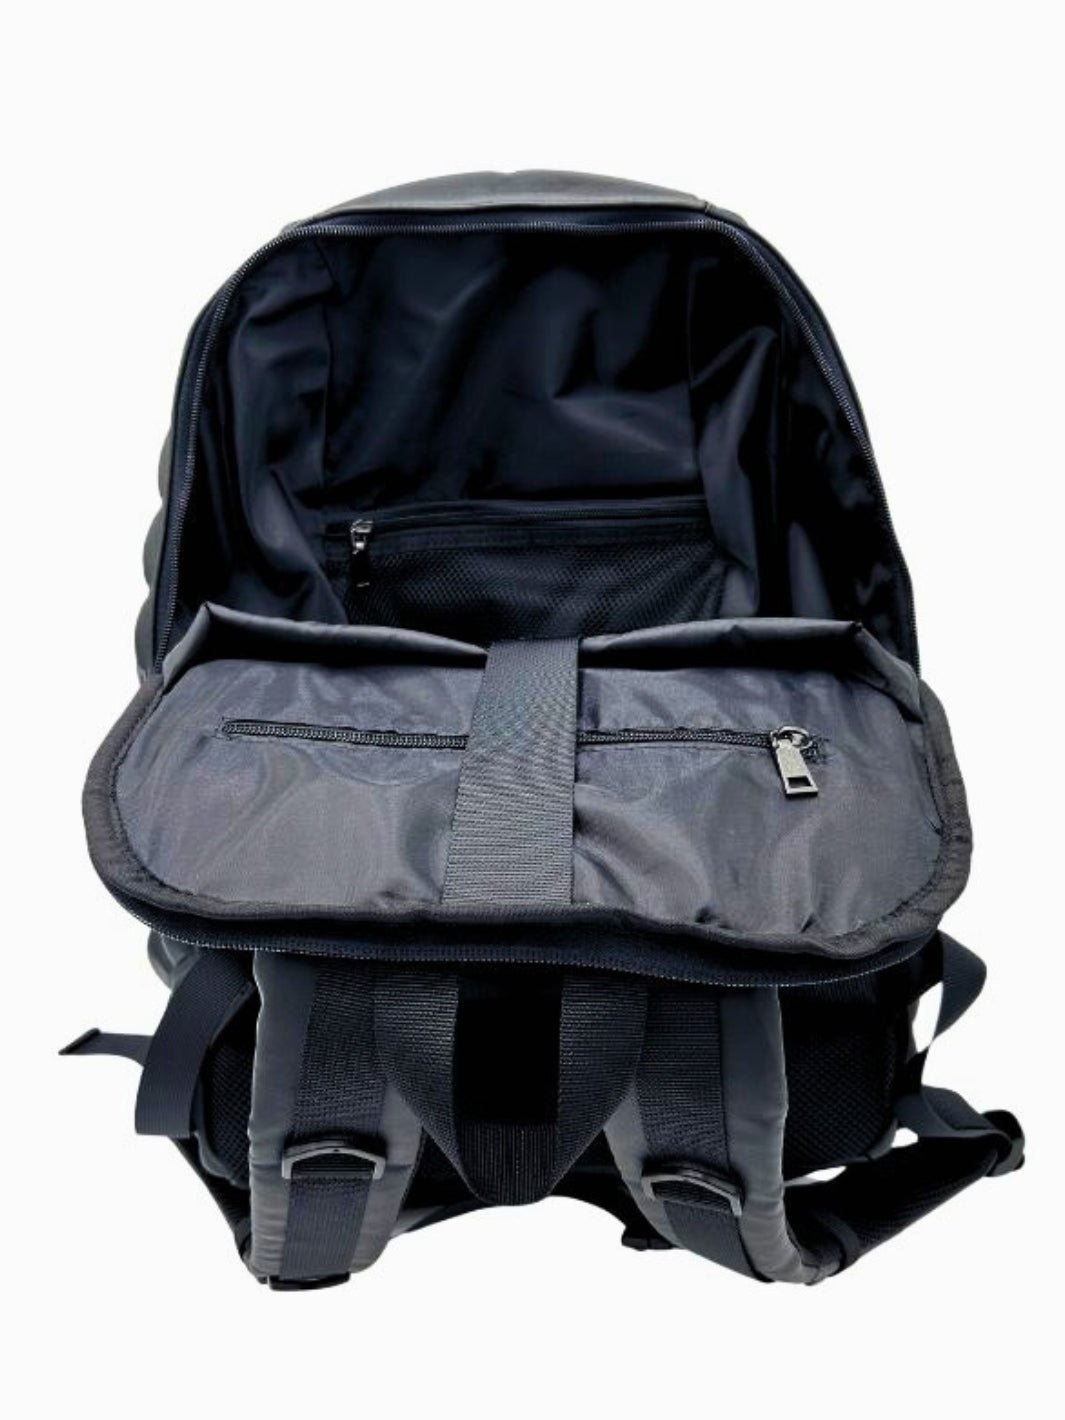 Zippered Pockets of Got Your Black - Black Backpack | Madpax